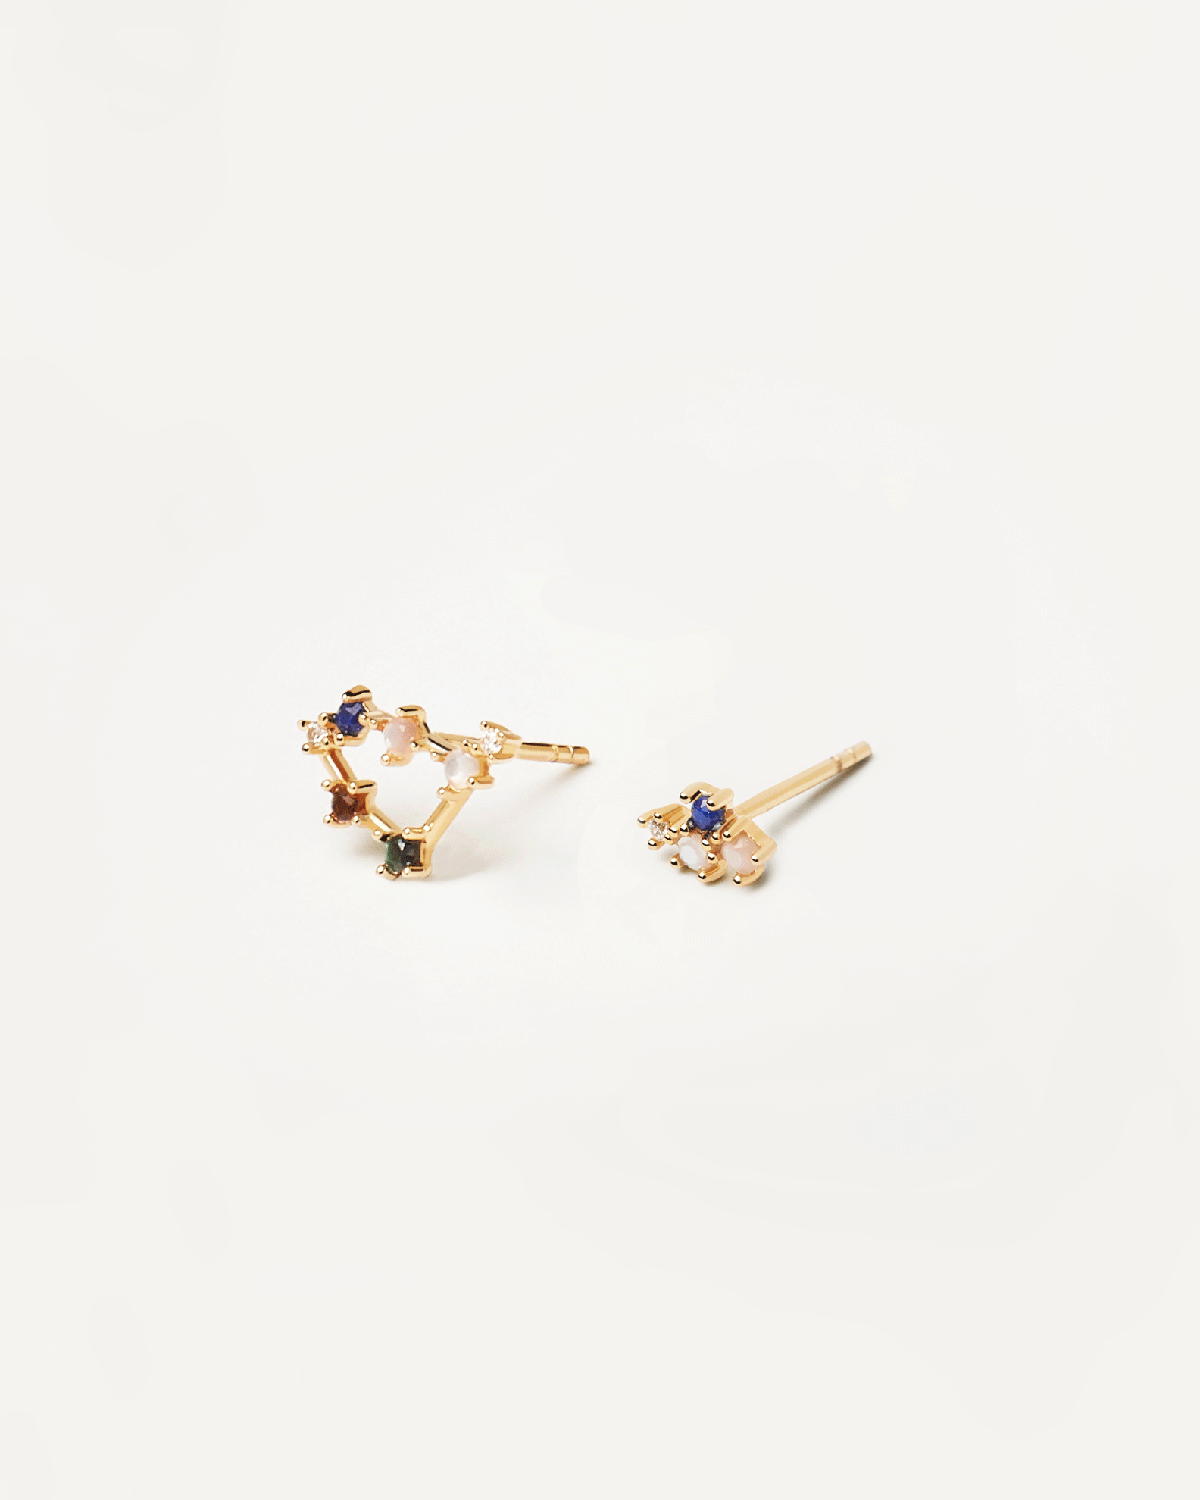 2021 Selection | Capricorn Earrings. Get the latest arrival from PDPAOLA. Place your order safely and get this Best Seller. Free Shipping over 70€